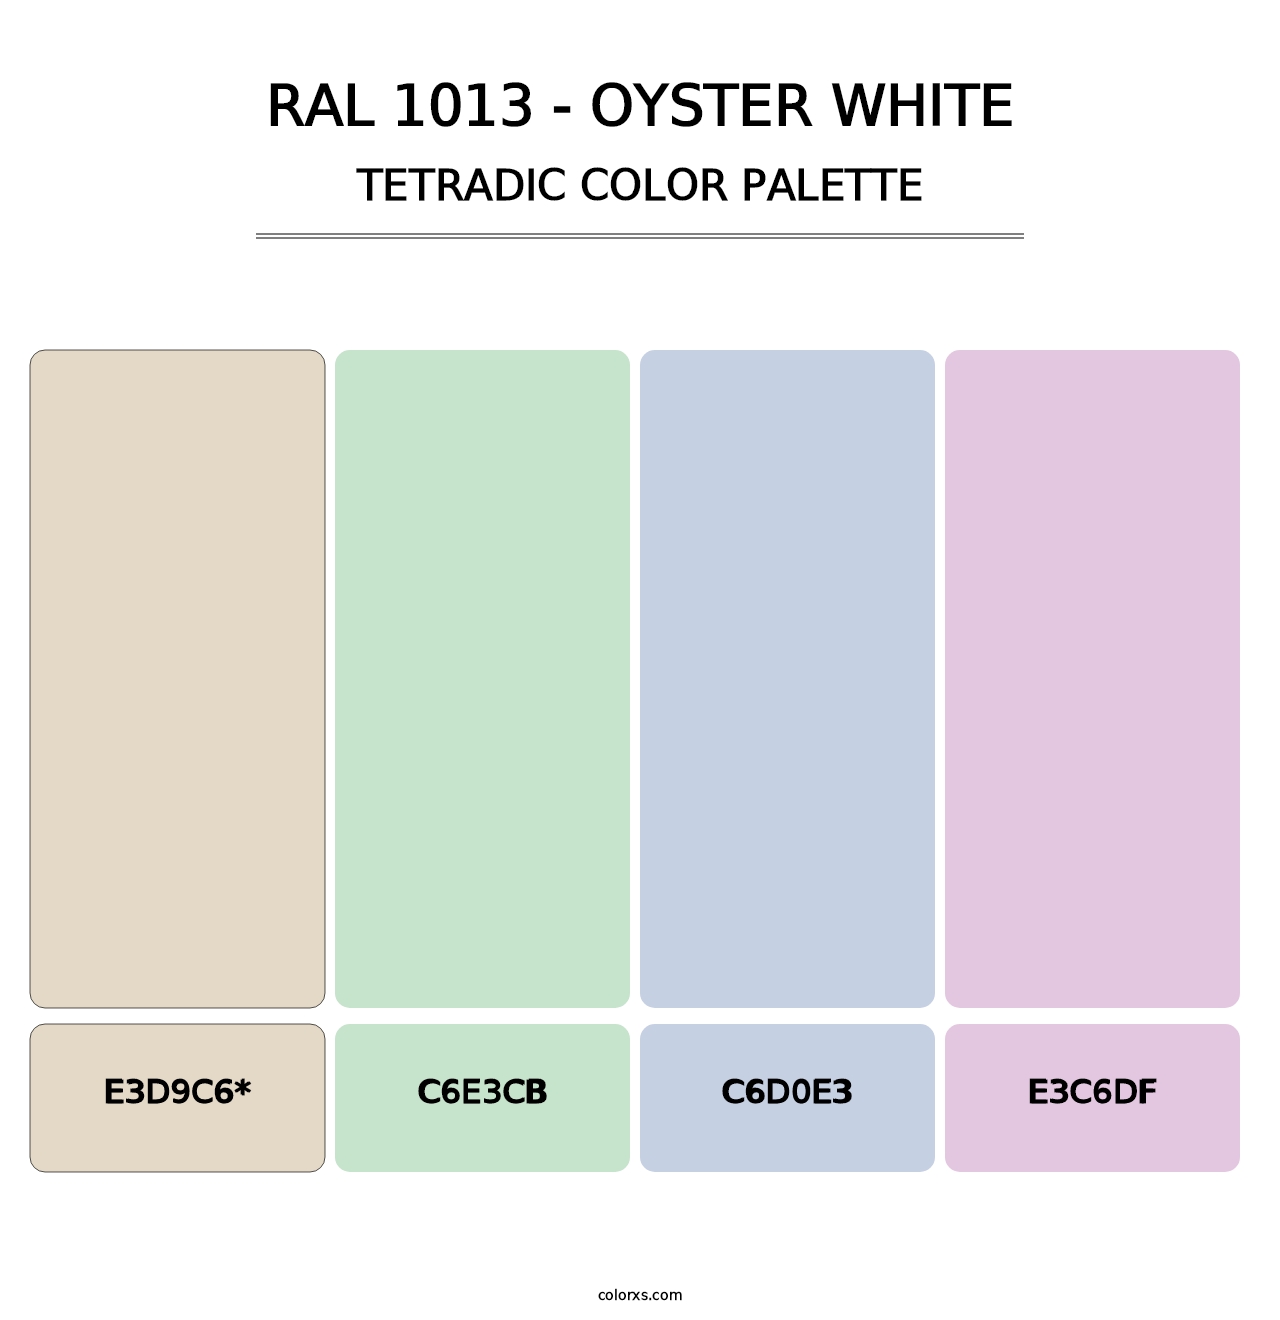 RAL 1013 - Oyster White - Tetradic Color Palette